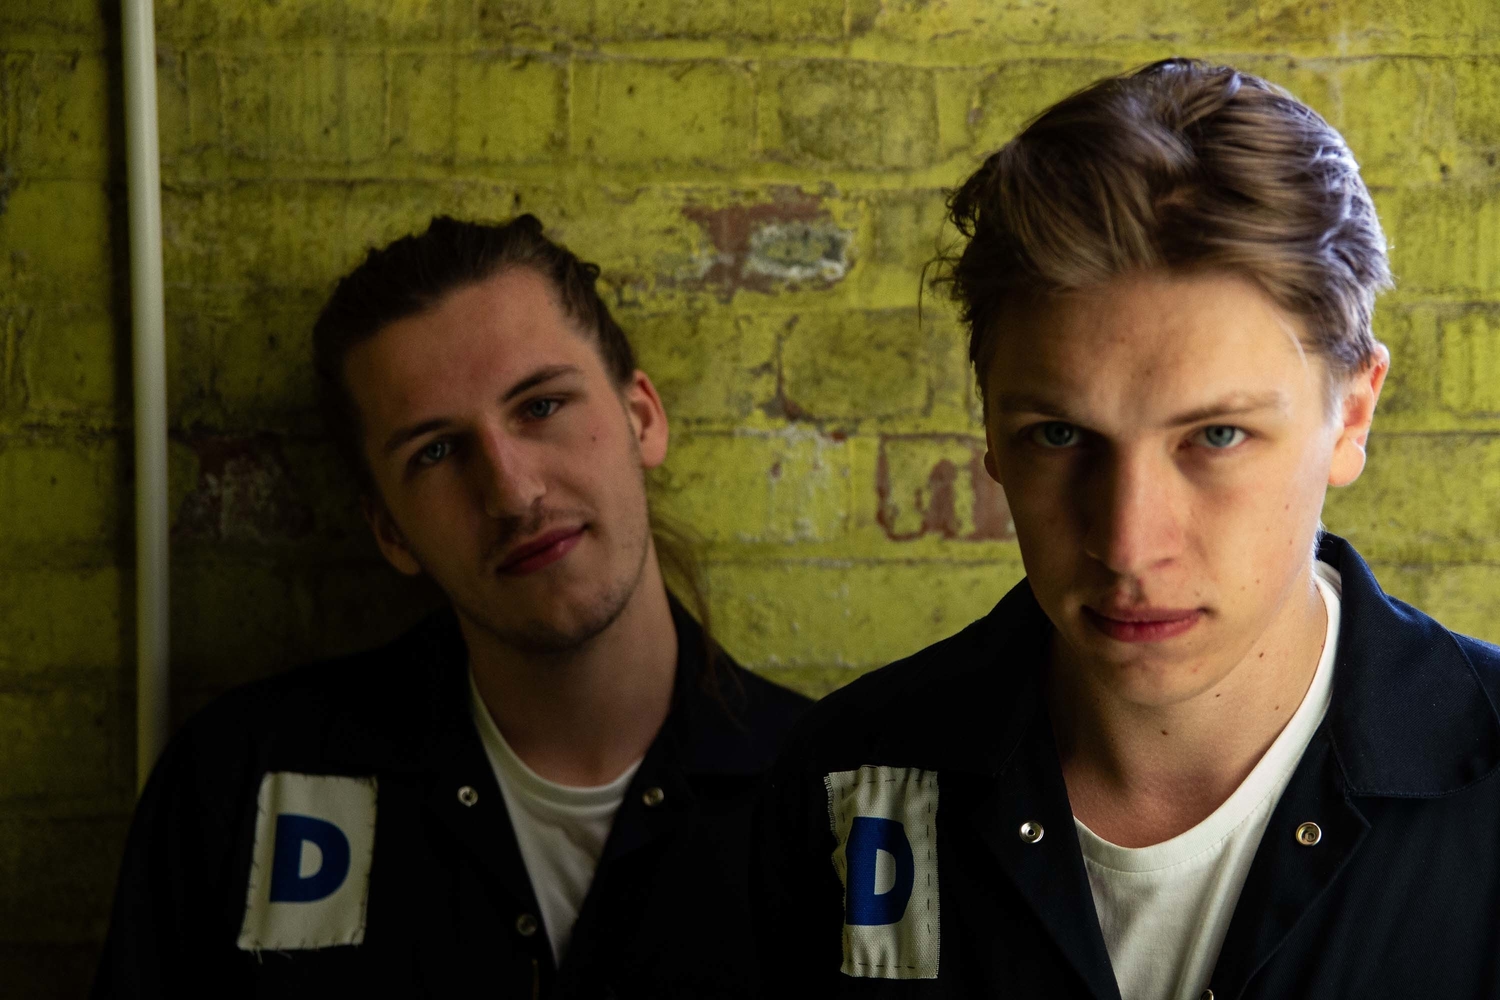 Drenge: "We wanted to come back and remind people what we stand for"